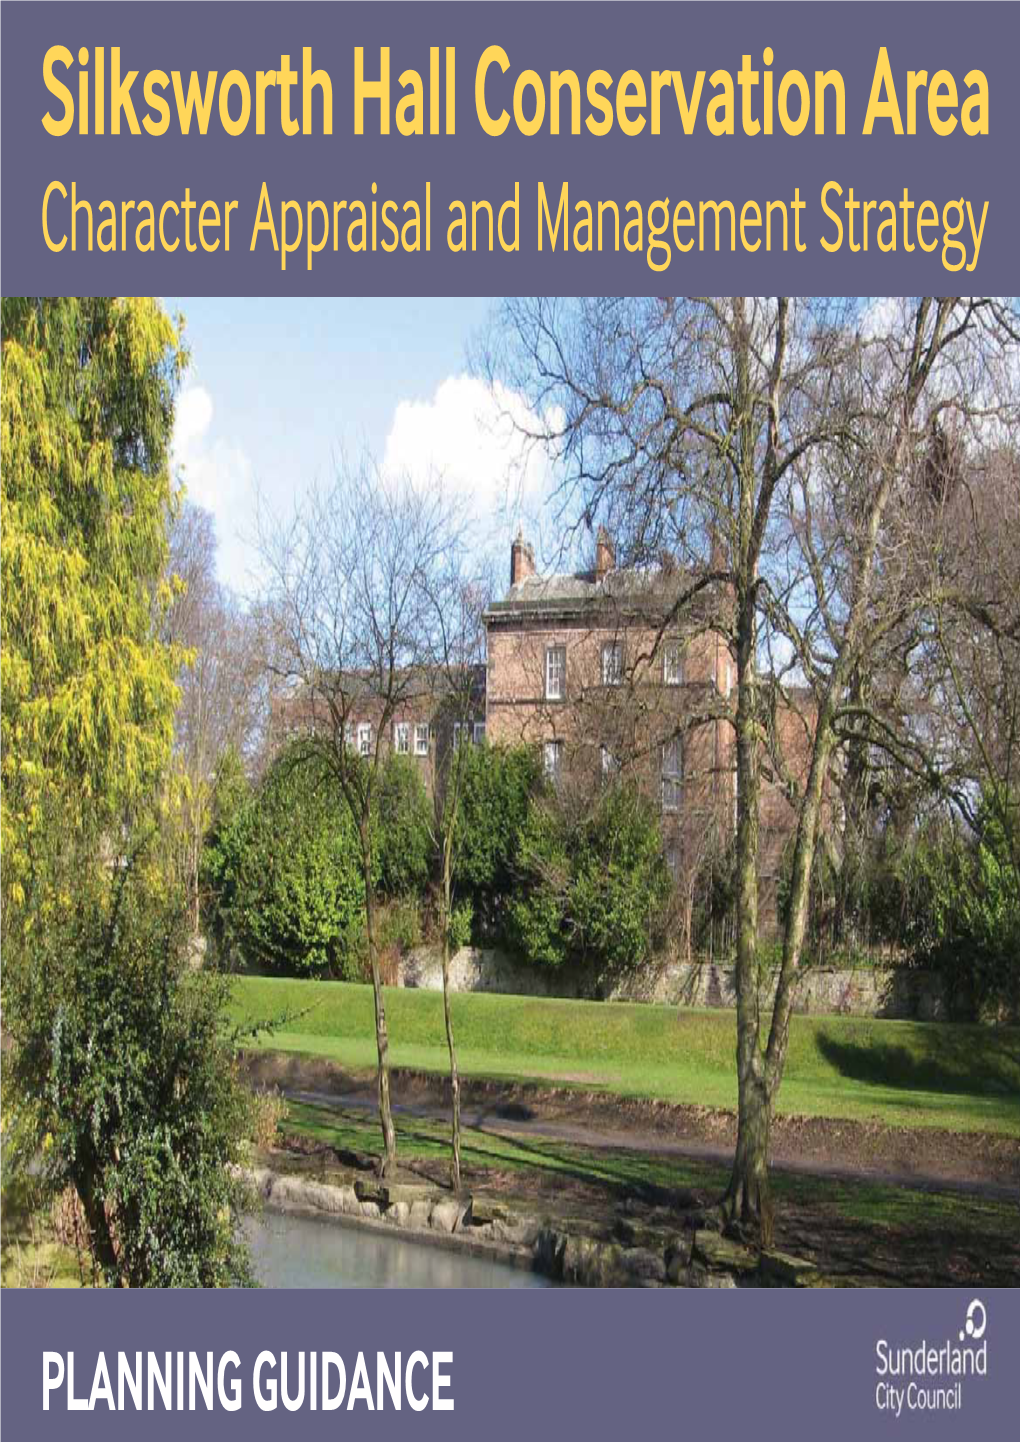 Silksworth Hall Character Appraisal and Management Strategy Is One of a Series of Such Assessments That Will Cover All the City’S Conservation Areas